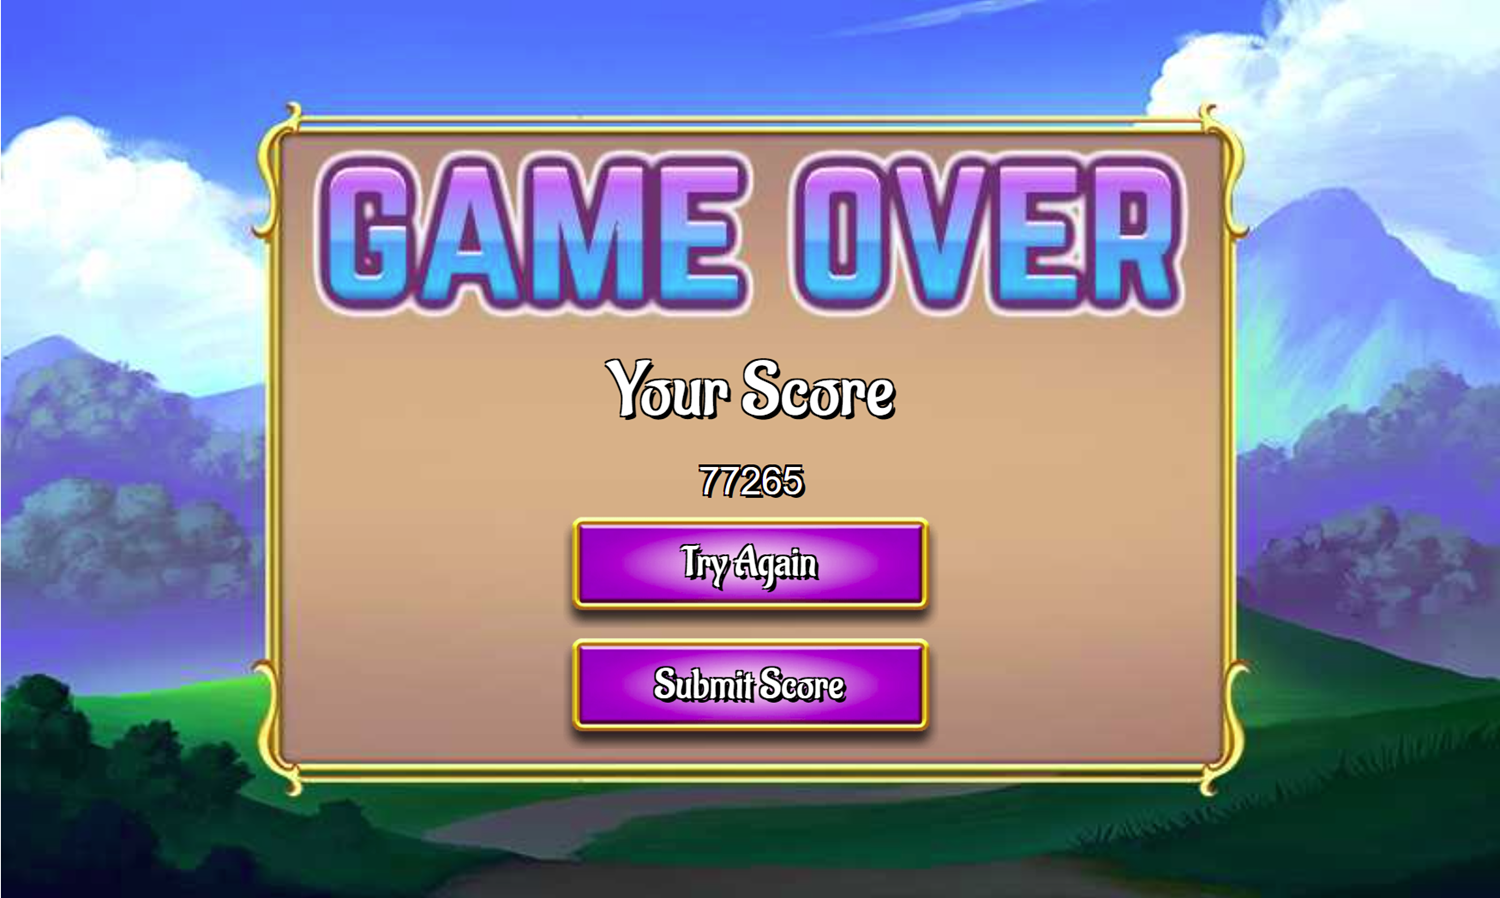 Stronghold Solitaire Game Beat Screenshot.